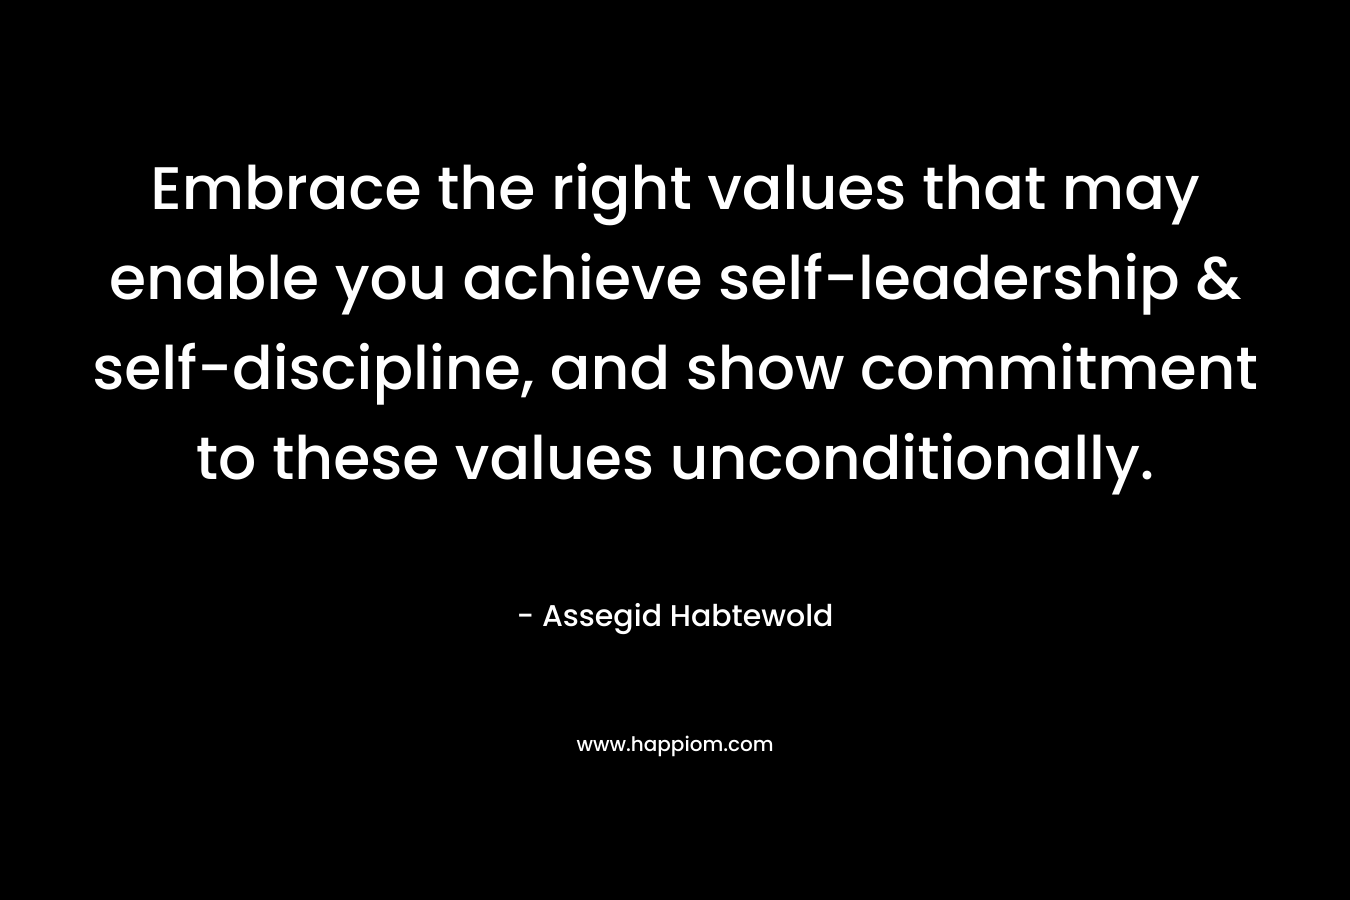 Embrace the right values that may enable you achieve self-leadership & self-discipline, and show commitment to these values unconditionally. – Assegid Habtewold